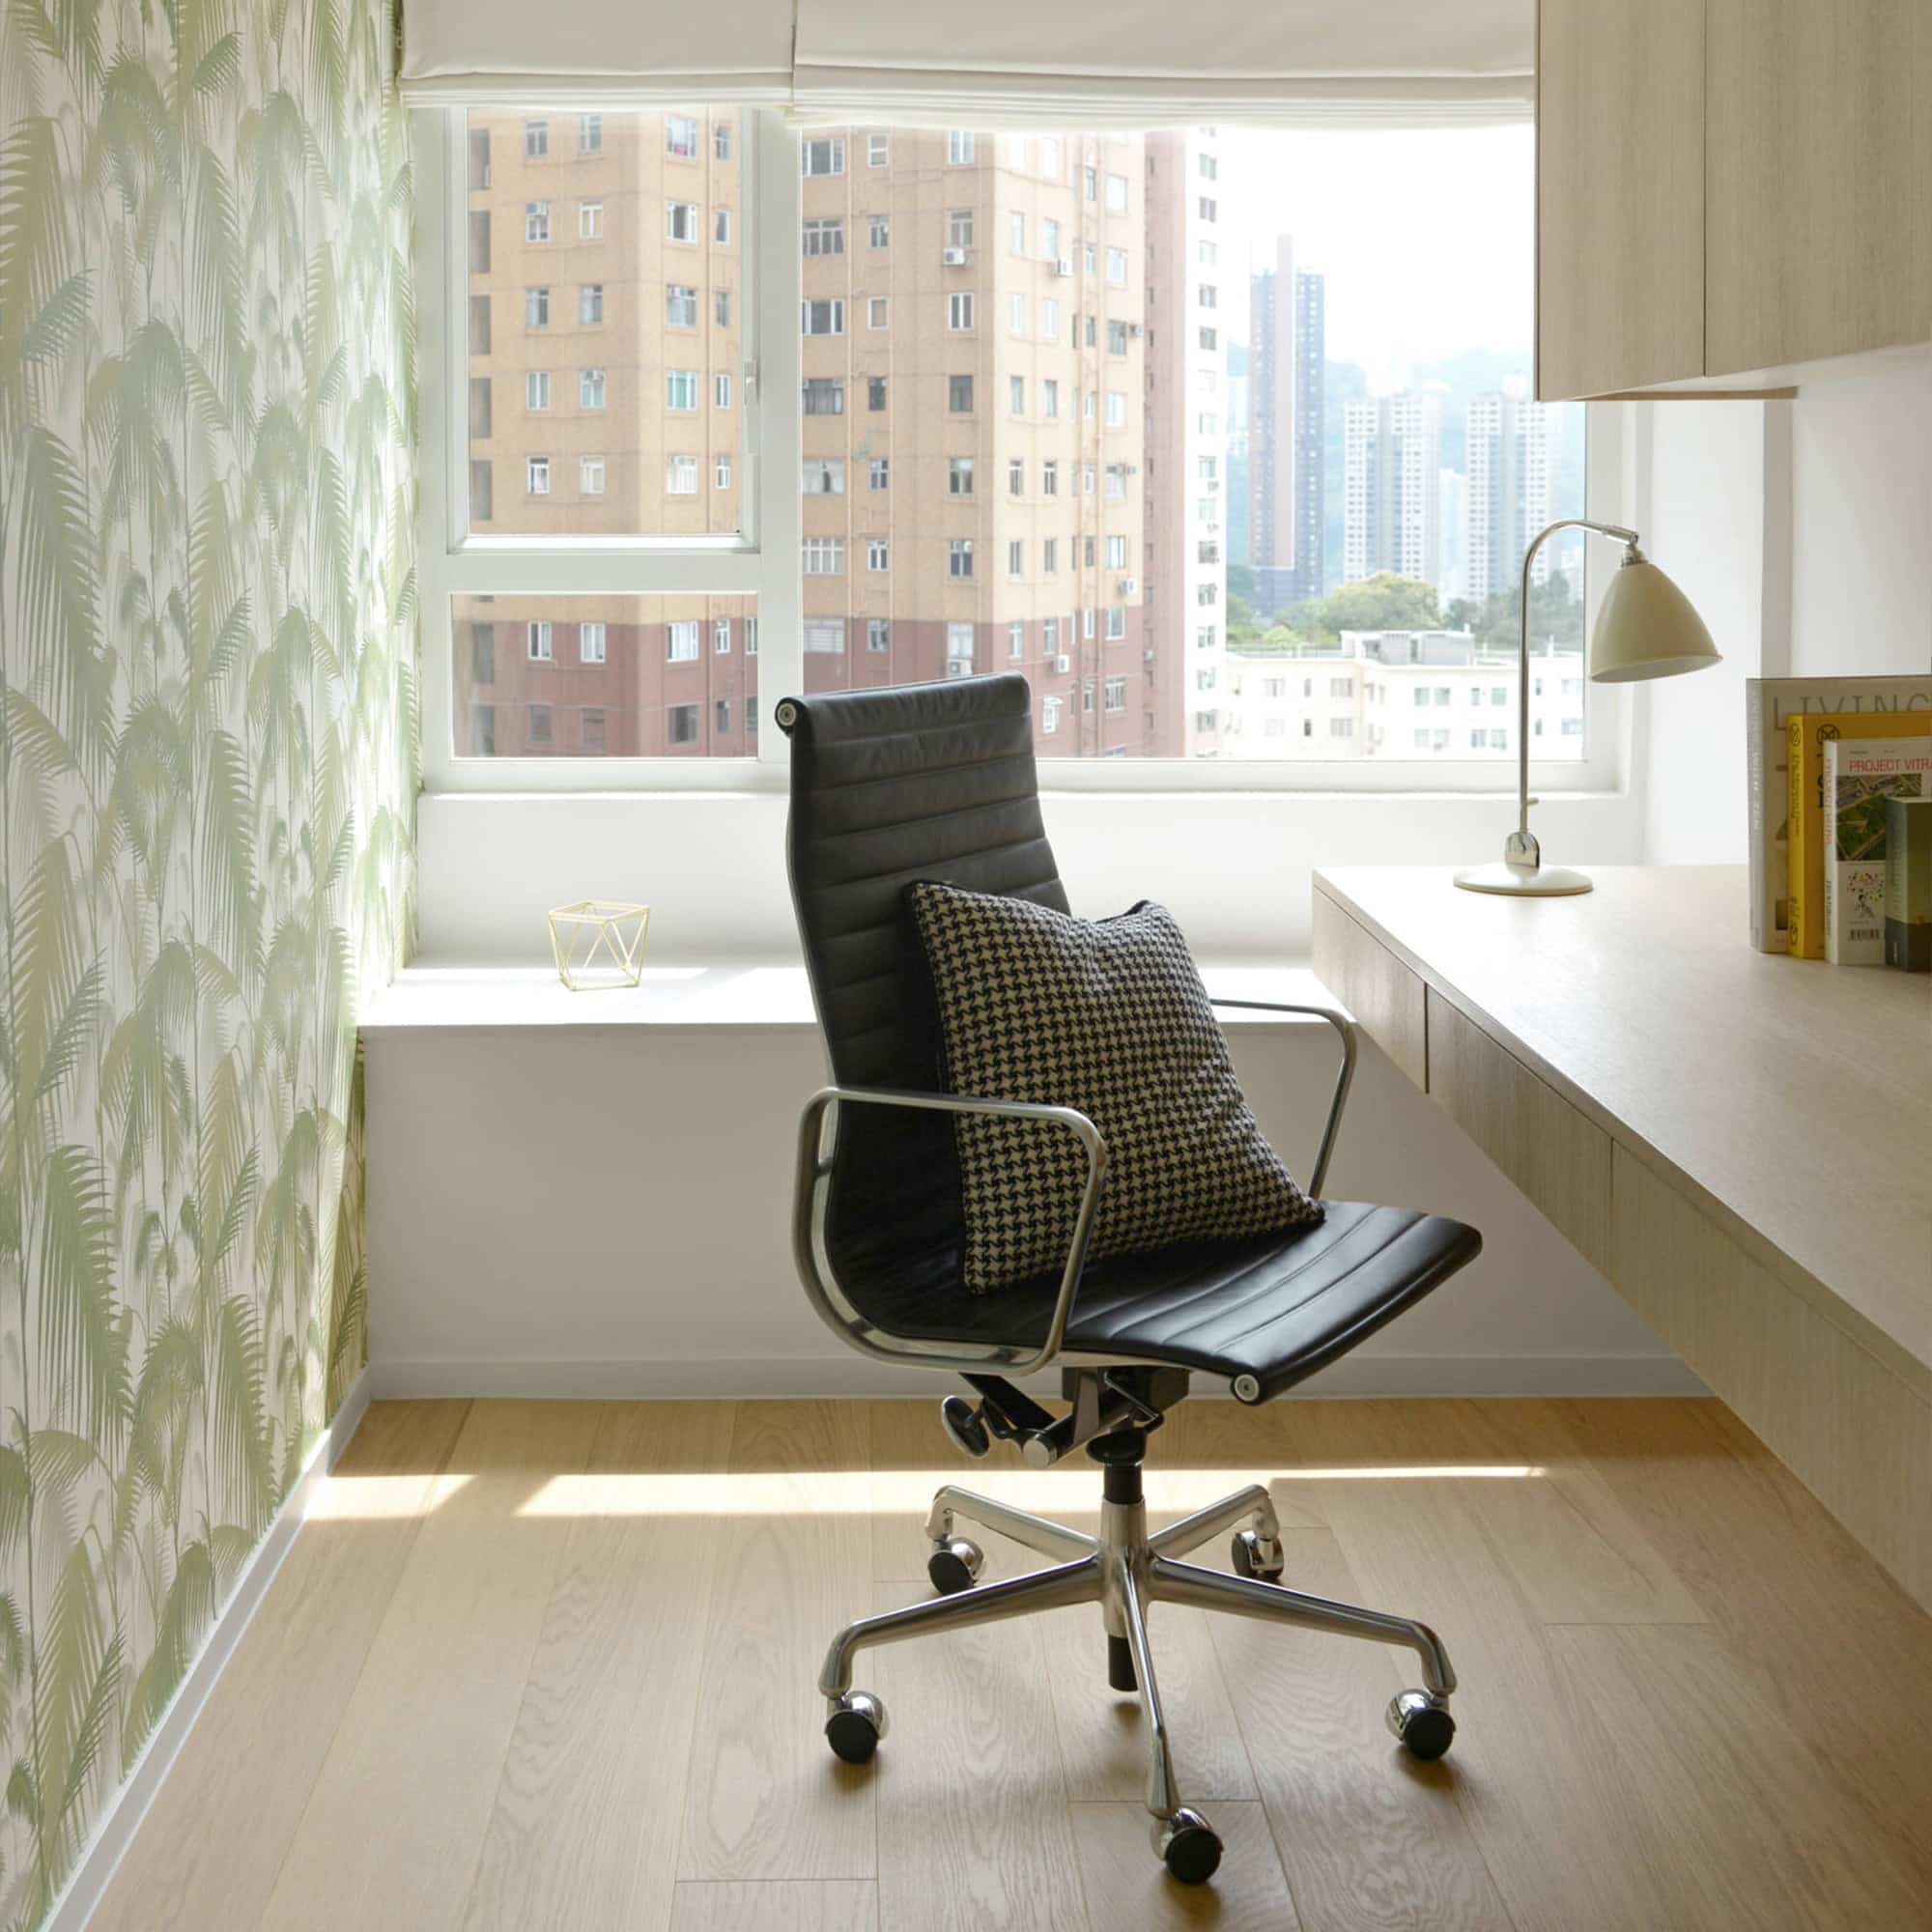 Eames Office Chair Replica - Stylish and Supportive